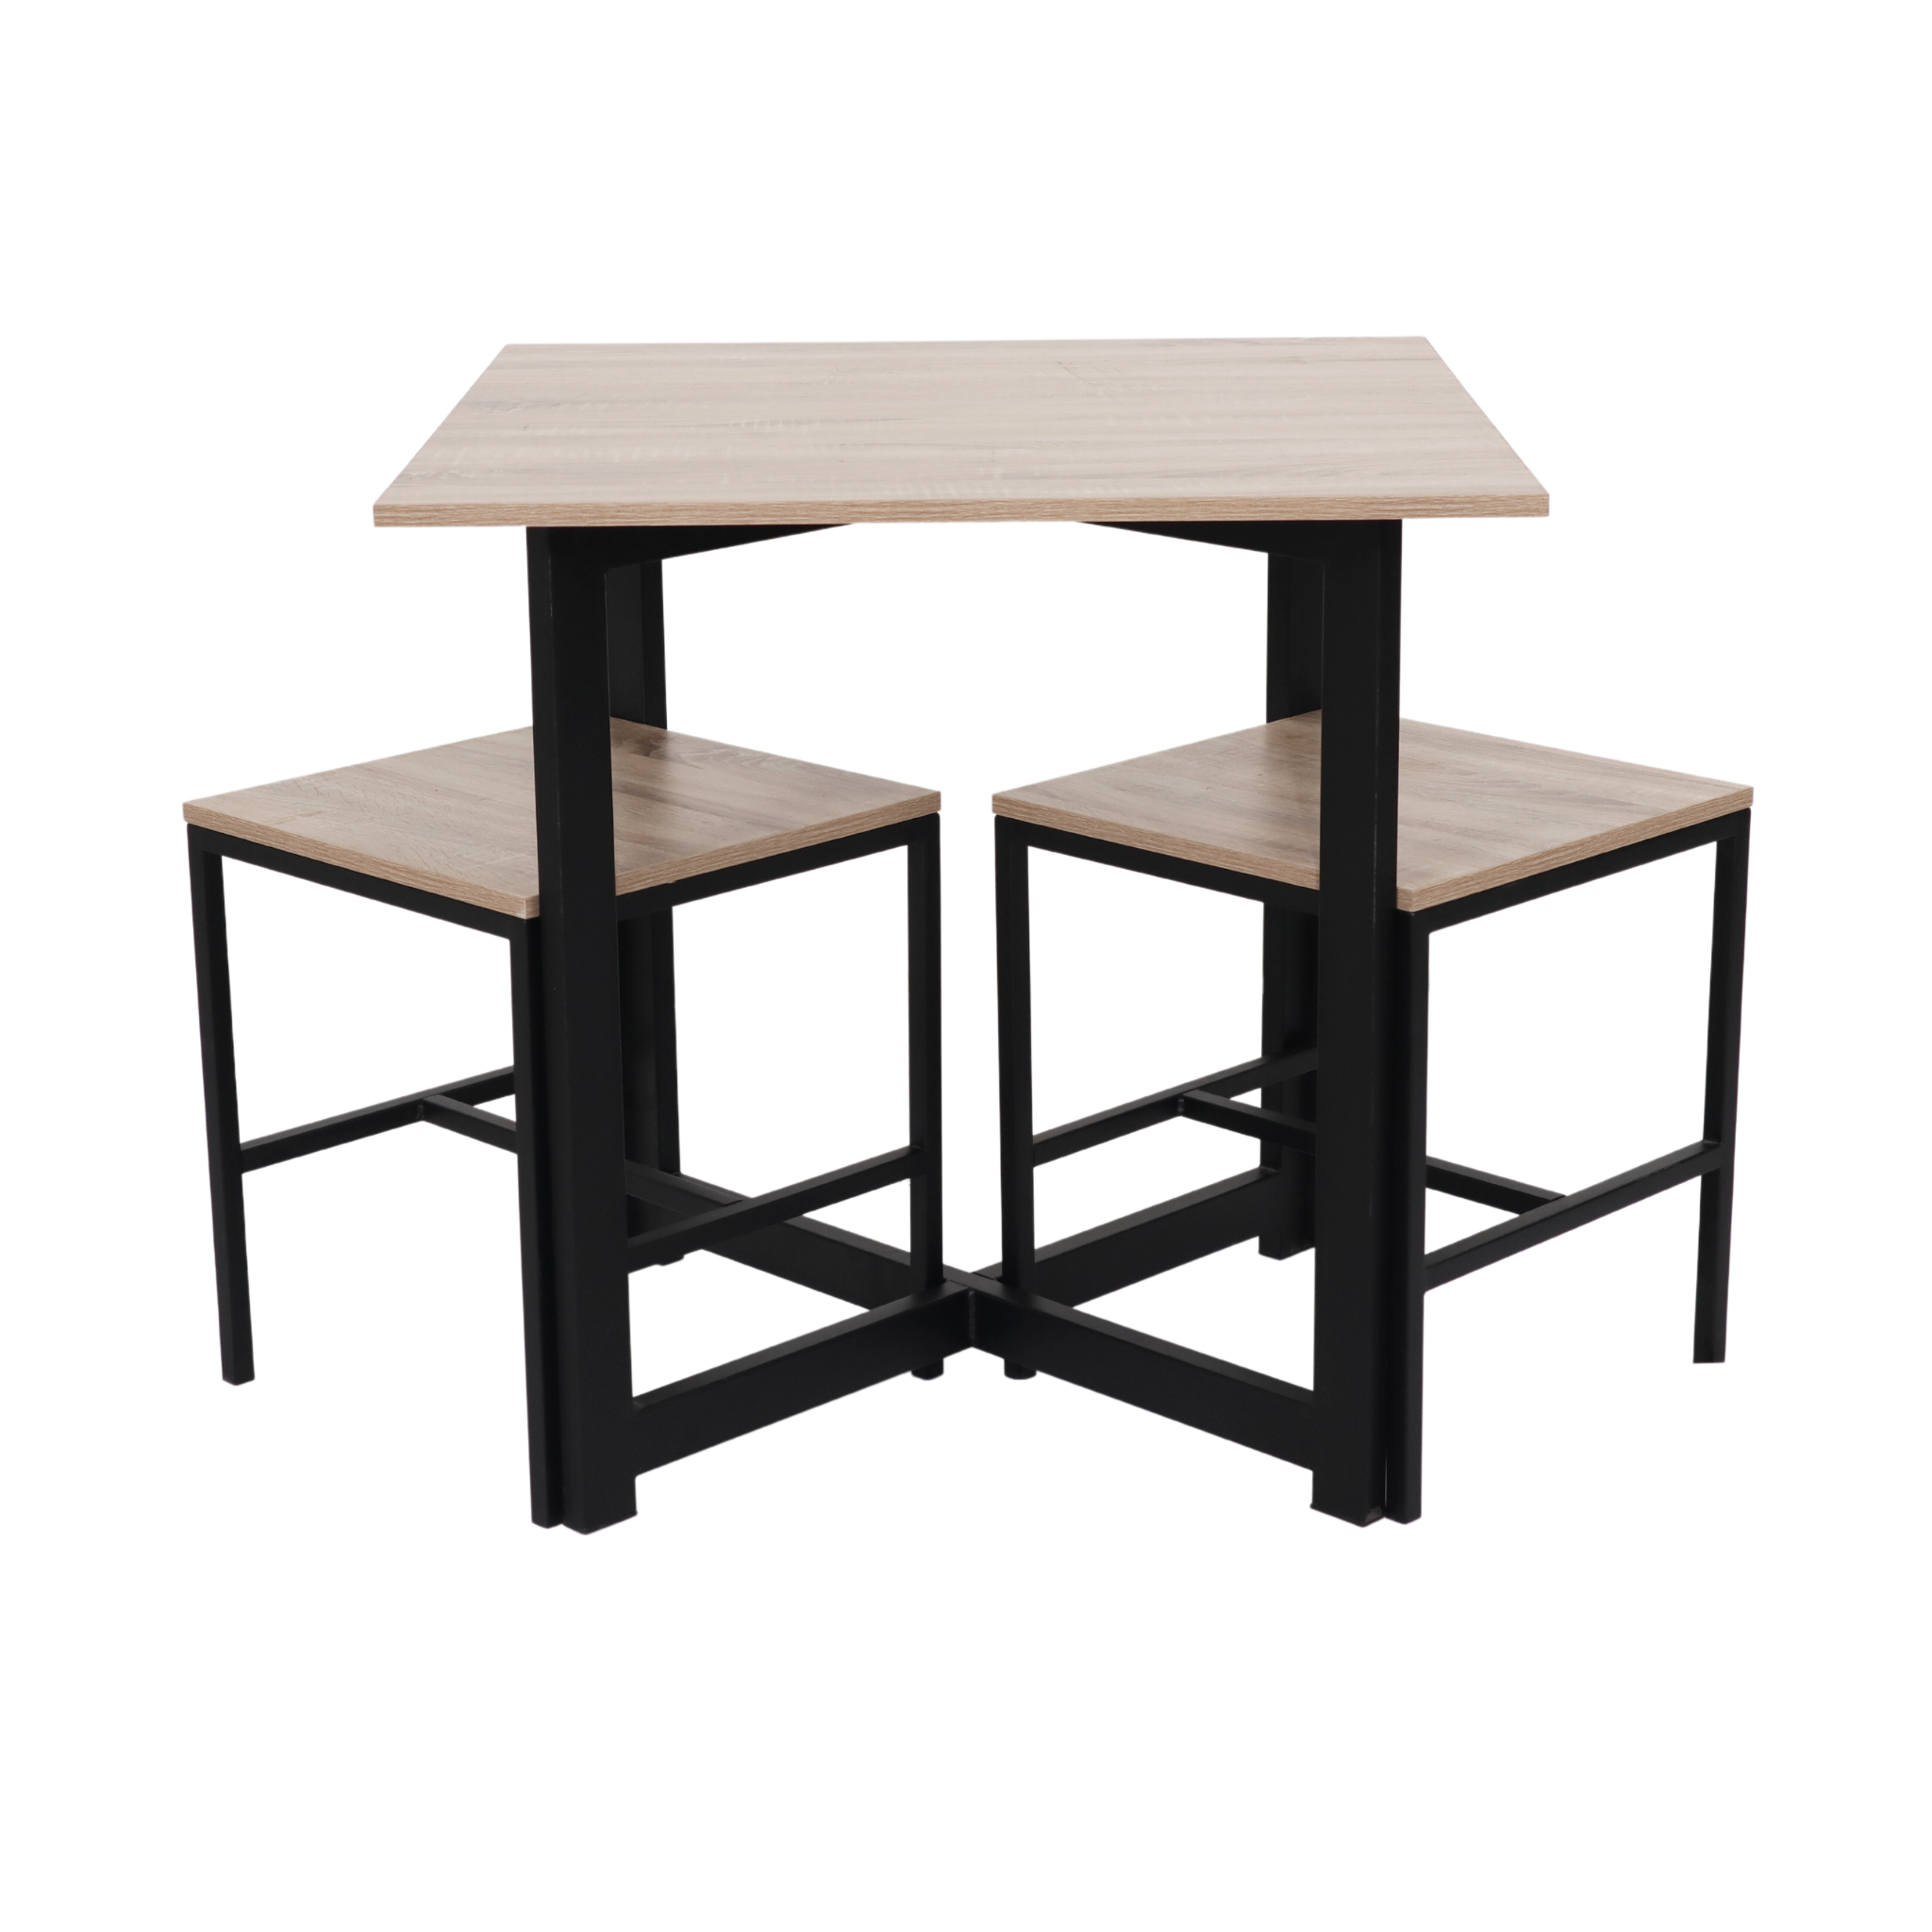 PAULO 2 Seater Dining Table Set AF Home